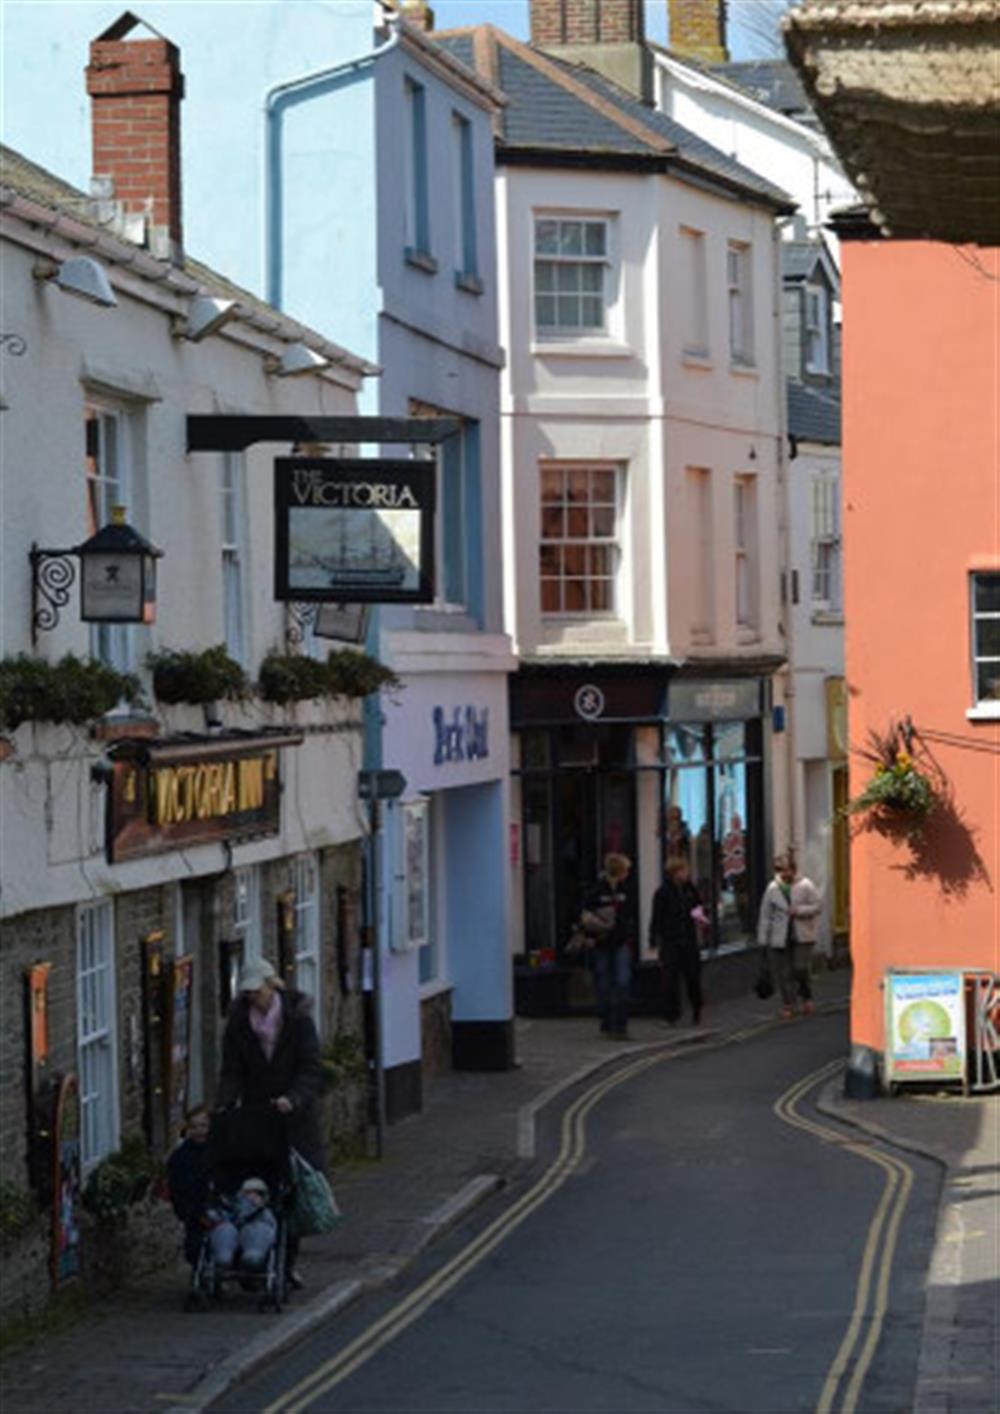 Fore Street in the centre of Salcombe is a 5 minute walk from the property at Lundy in Salcombe